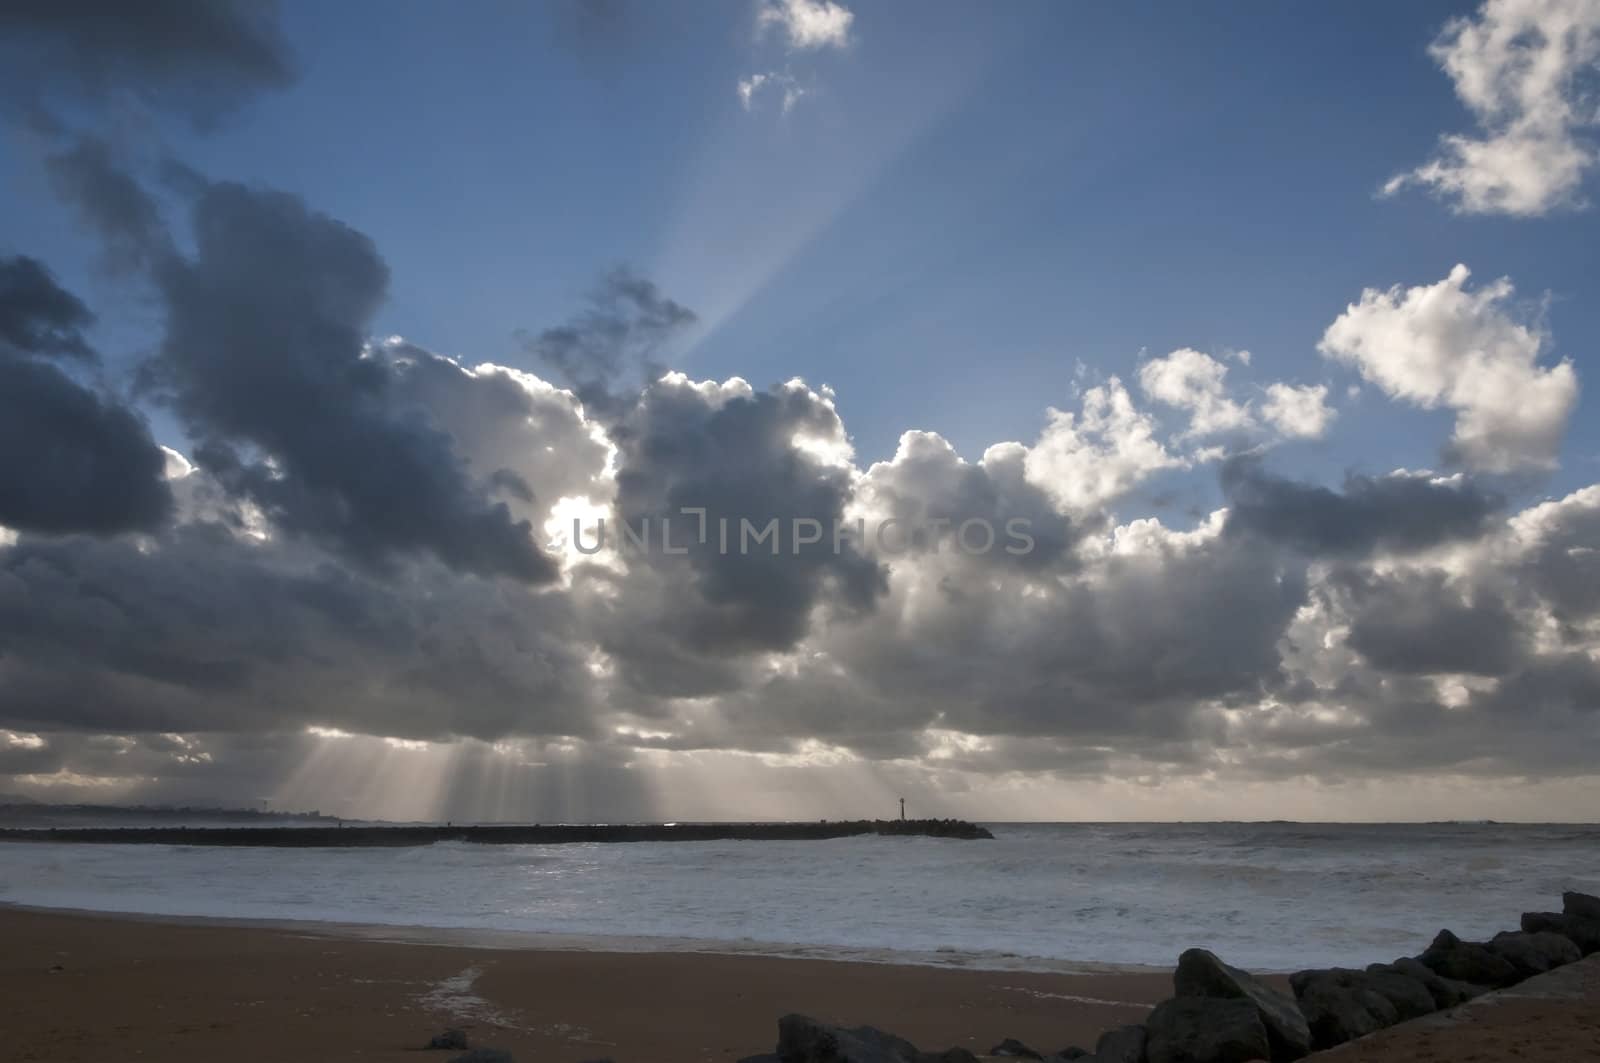 Many sunlight rays through big clouds above the sea during a stormy day